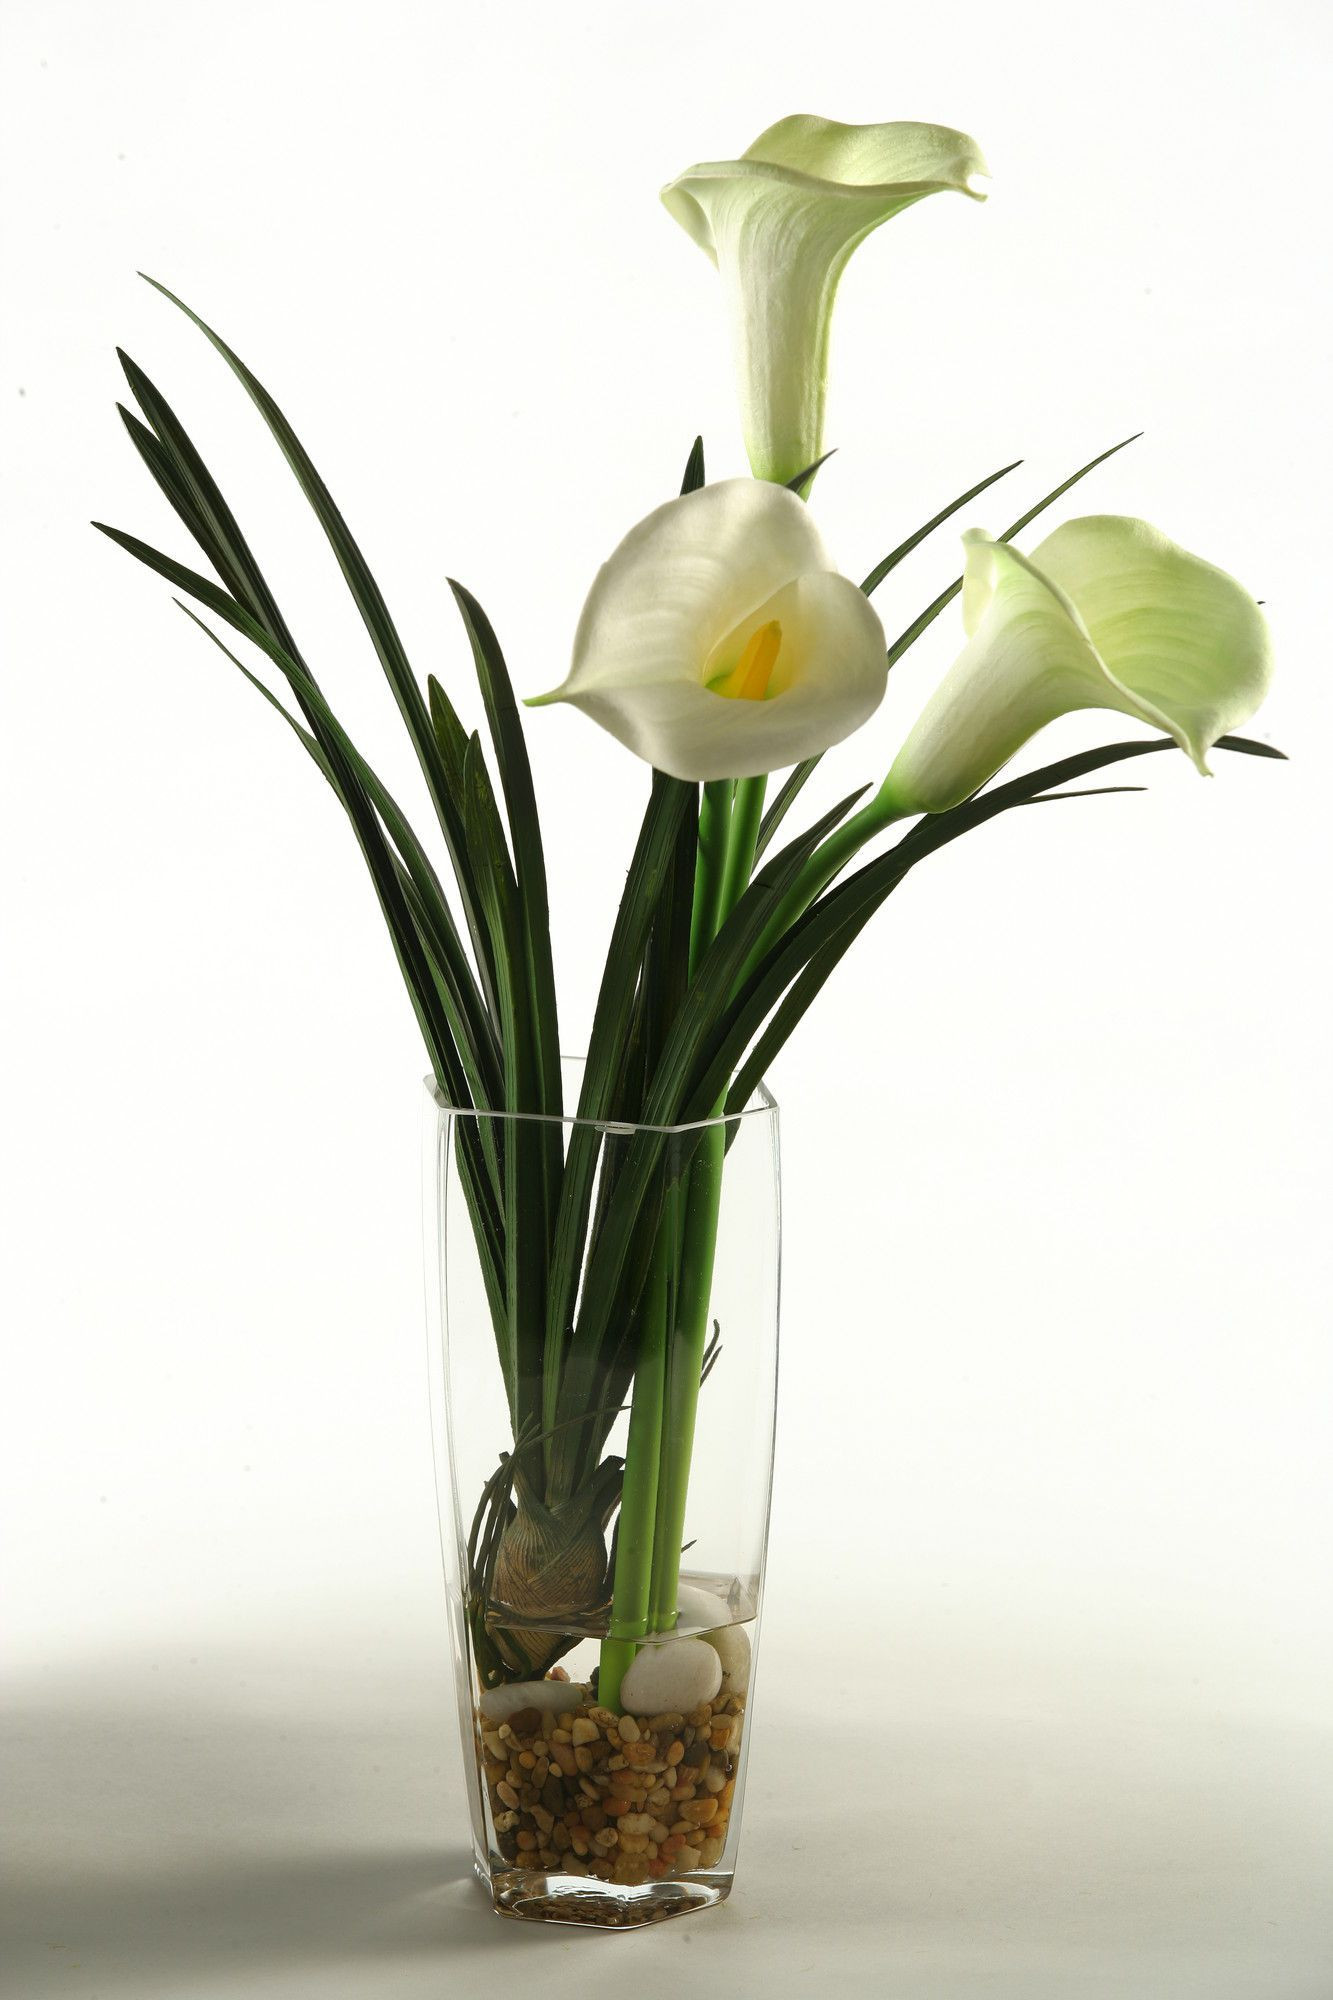 20 Lovely Cherry Blossom In Vase 2024 free download cherry blossom in vase of calla lilies in glass vase products pinterest calla lilies and within calla lilies in glass vase